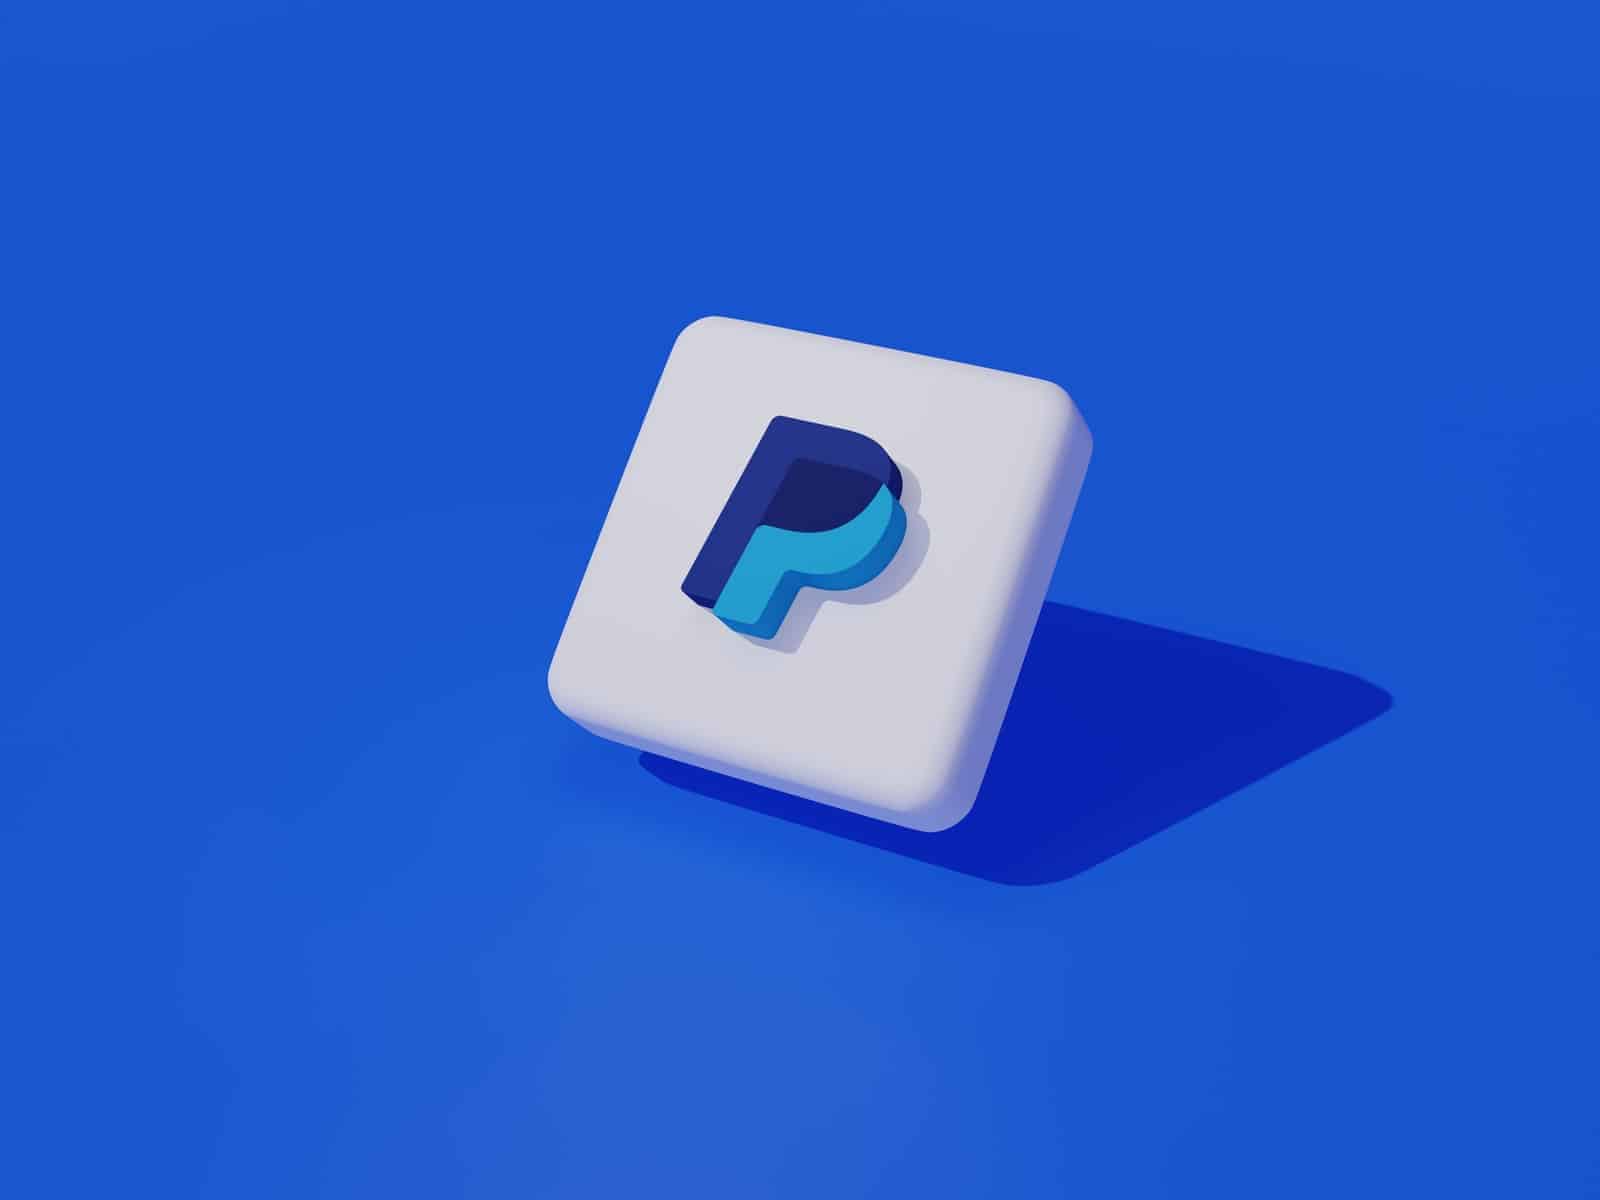 PayPal’s Blockchain Chief on the Future of Crypto in Payments